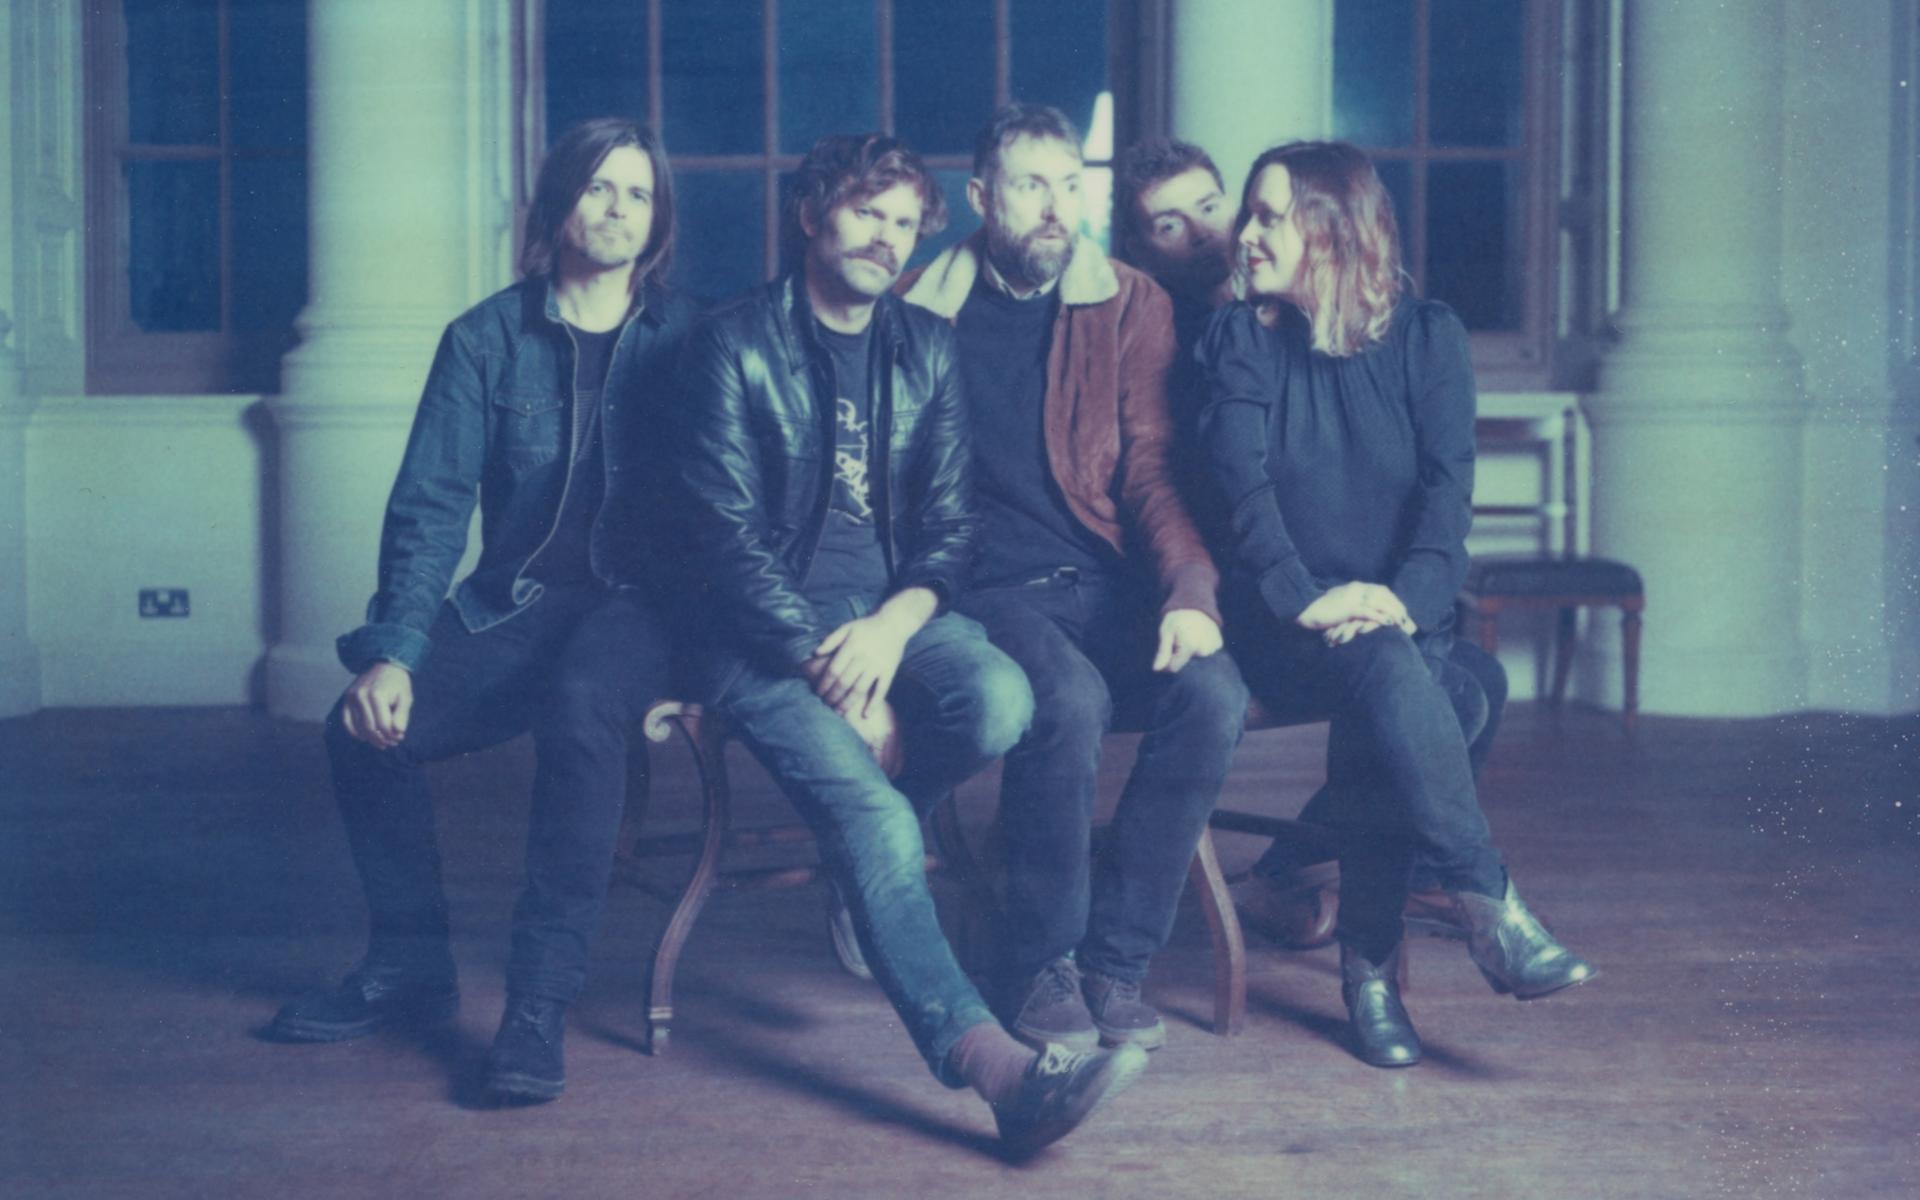 Slowdive detail first new album in 22 years, share video for 'Sugar For